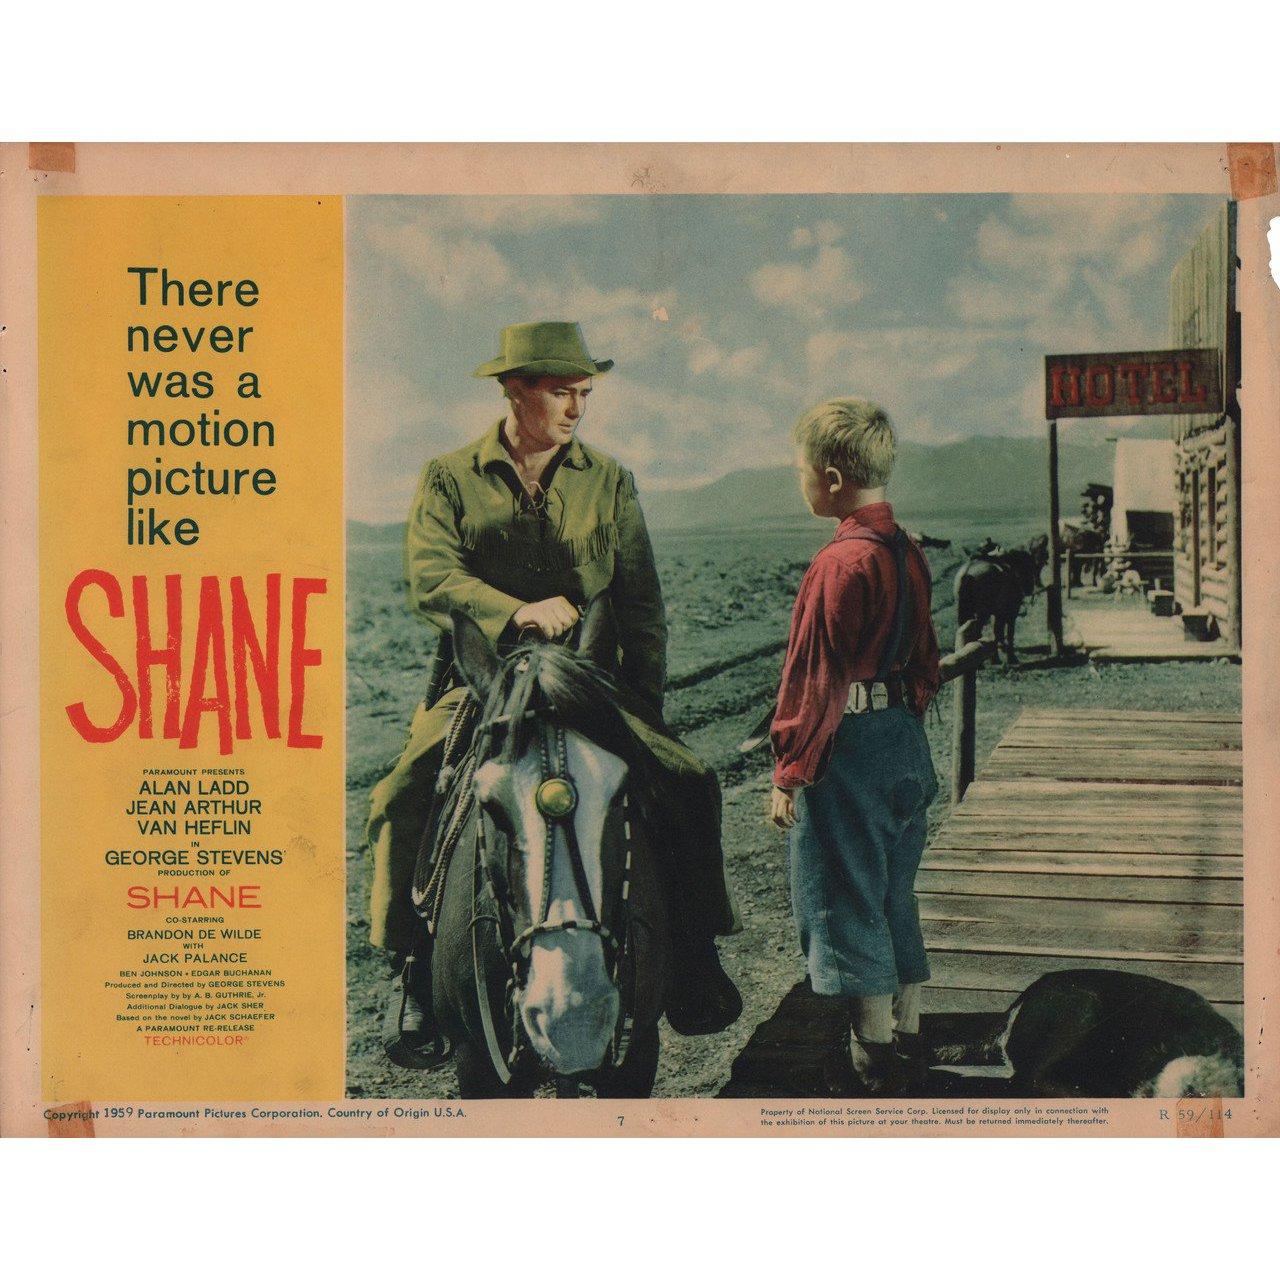 Original 1959 re-release U.S. scene card for the 1953 film Shane directed by George Stevens with Alan Ladd / Jean Arthur / Van Heflin / Brandon De Wilde. Very good condition, tape stains. Please note: the size is stated in inches and the actual size